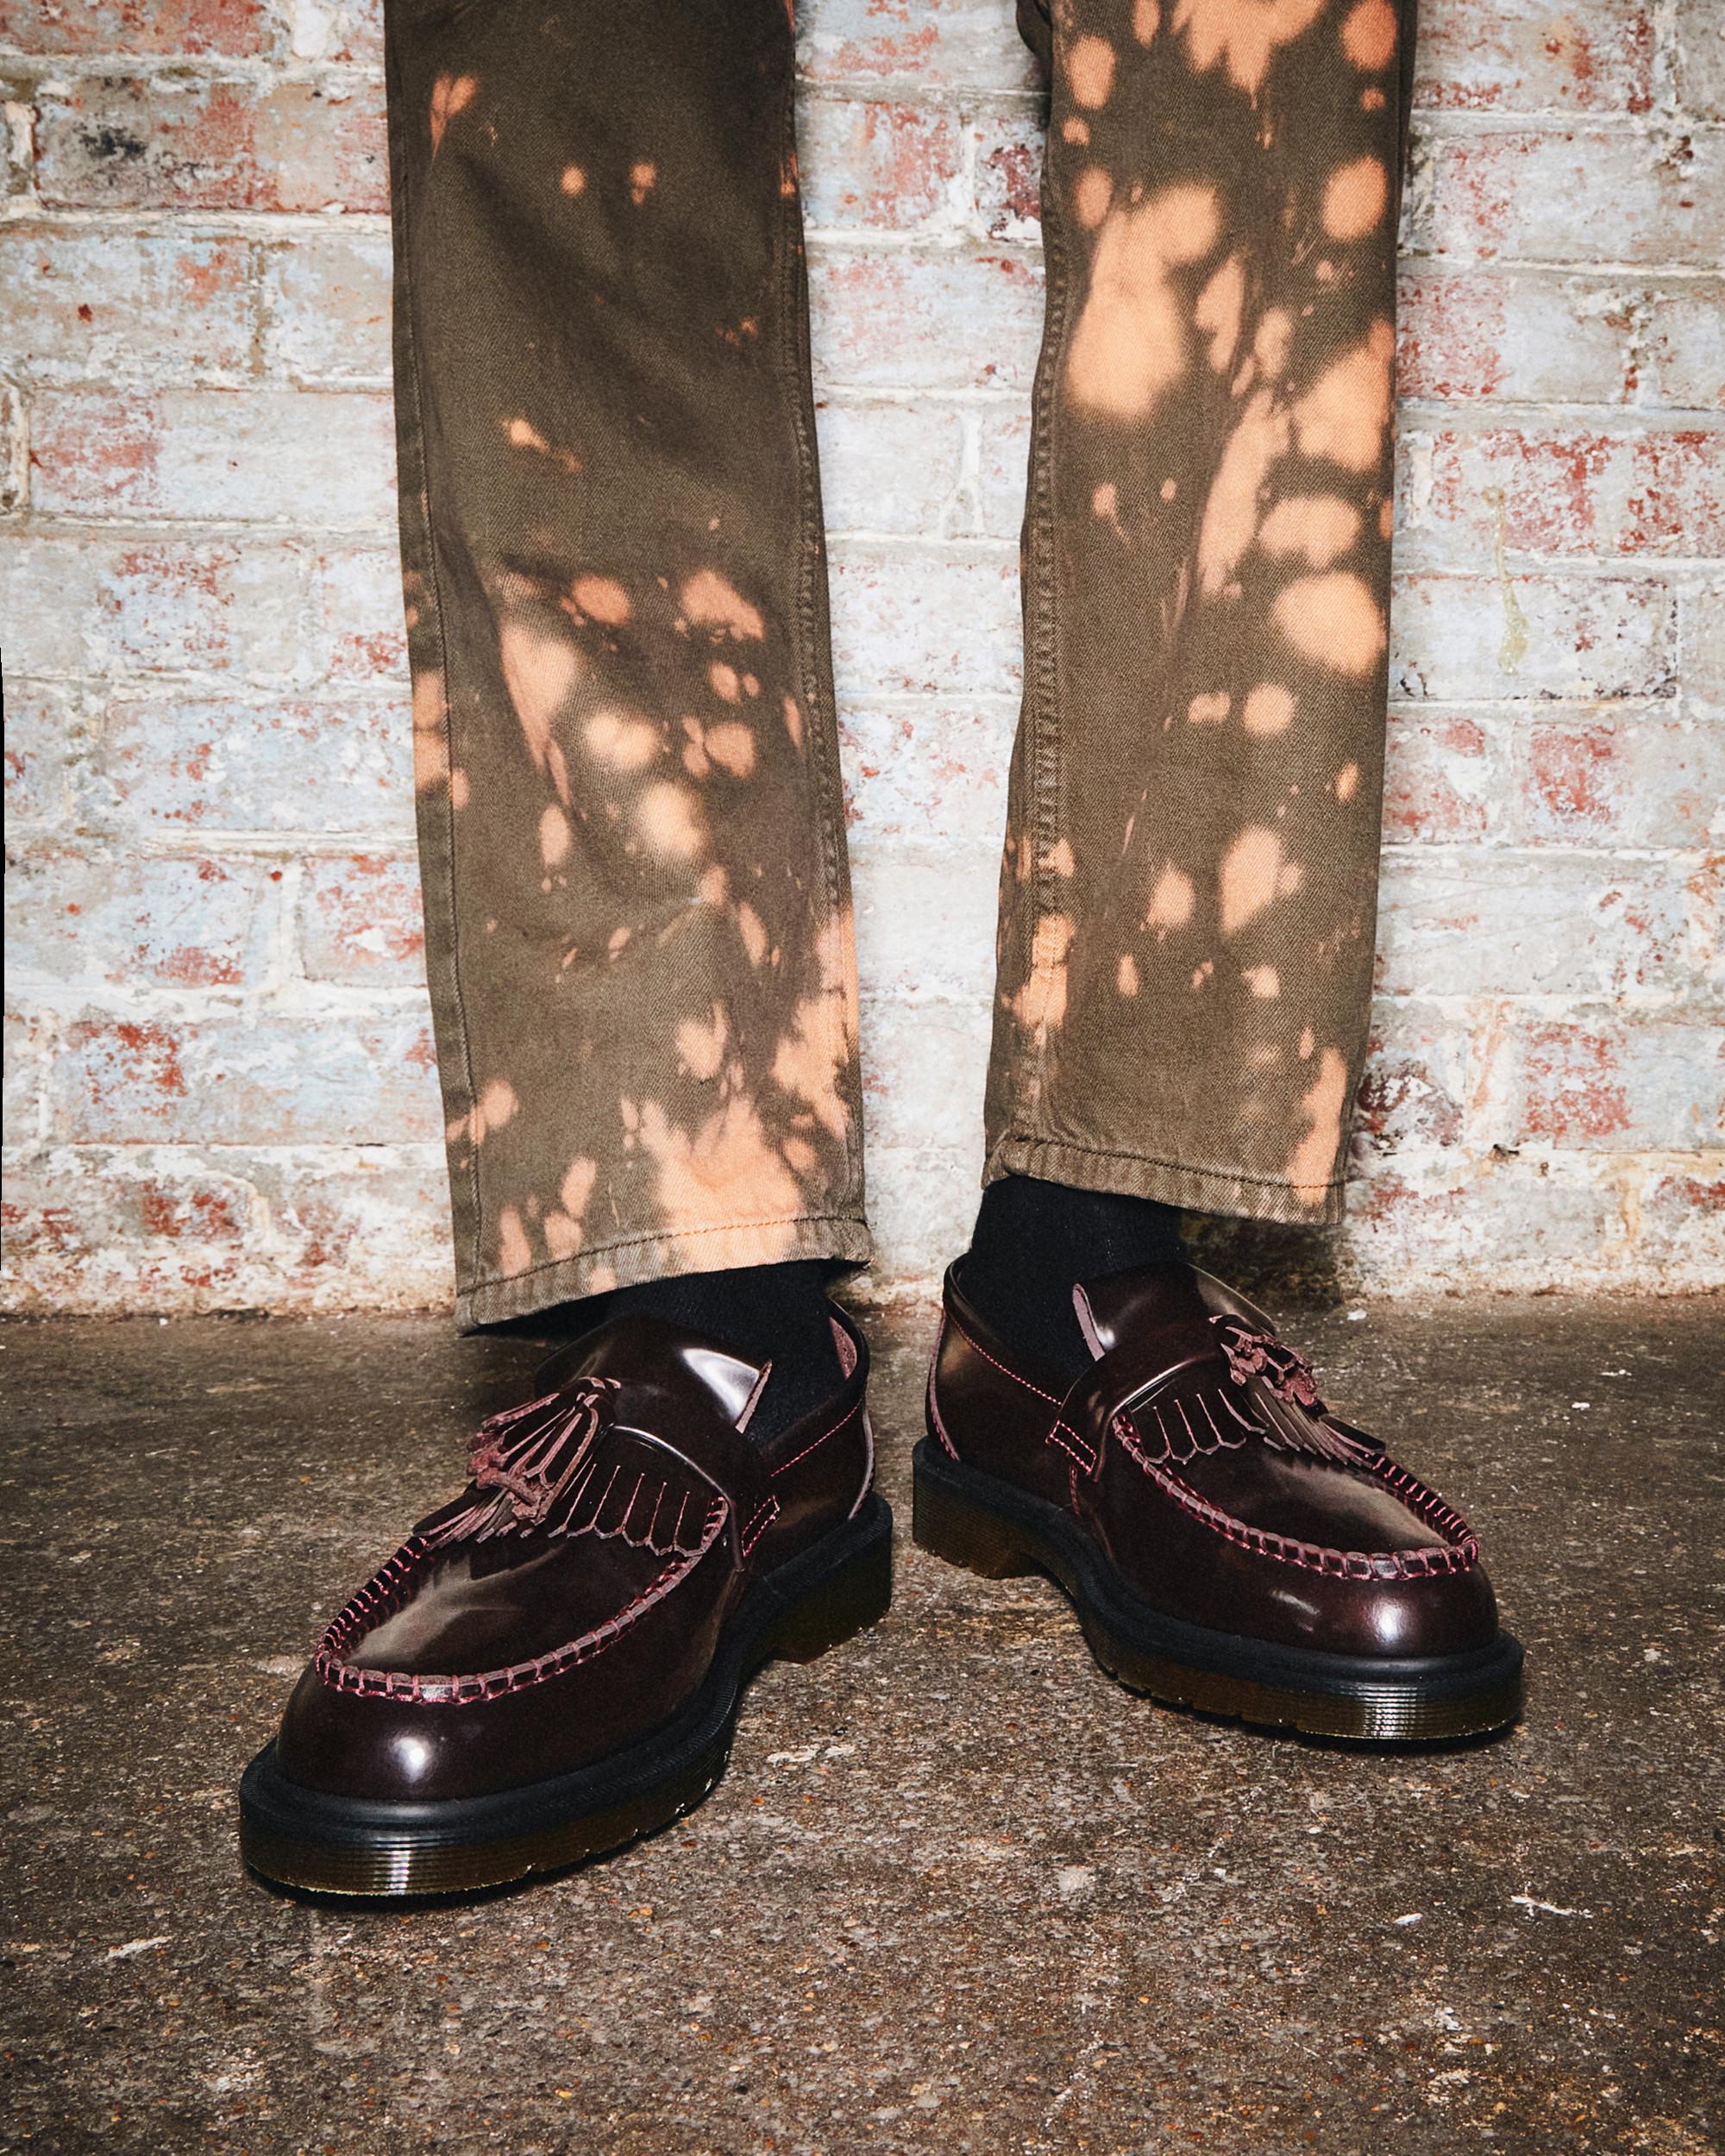 DR MARTENS Adrian Arcadia Leather Tassel Loafers